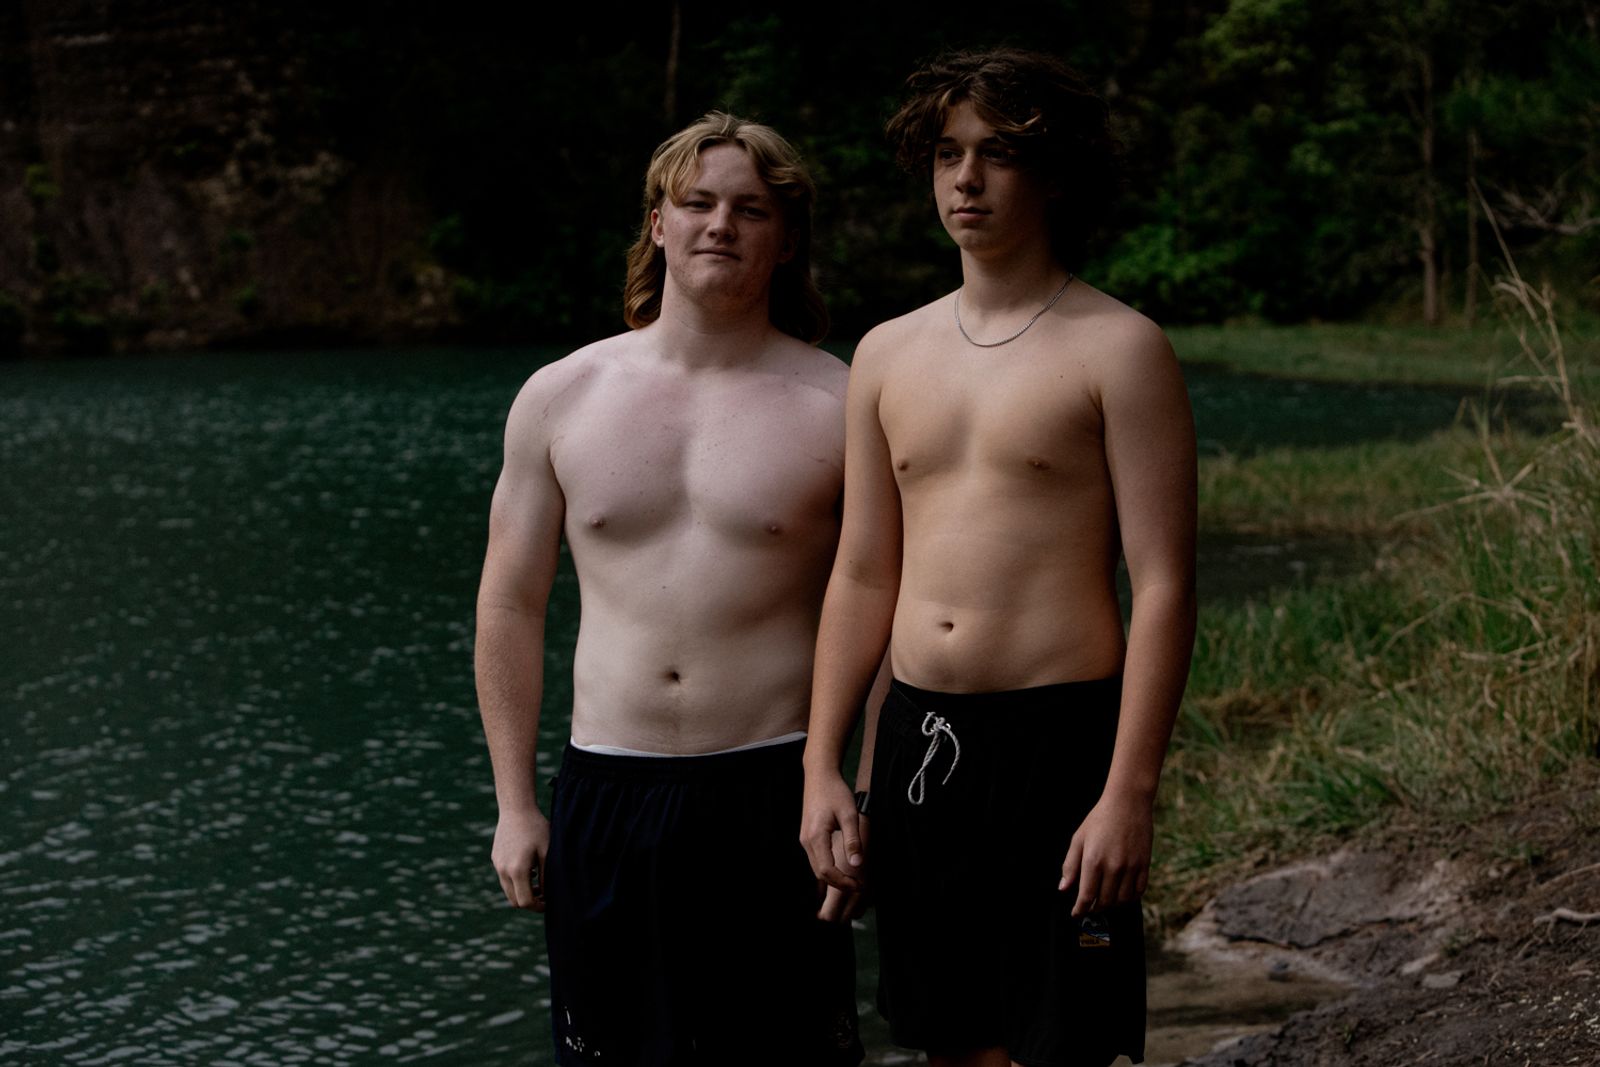 © Tajette O'halloran - Two boys pose for a portrait before they go for a swim